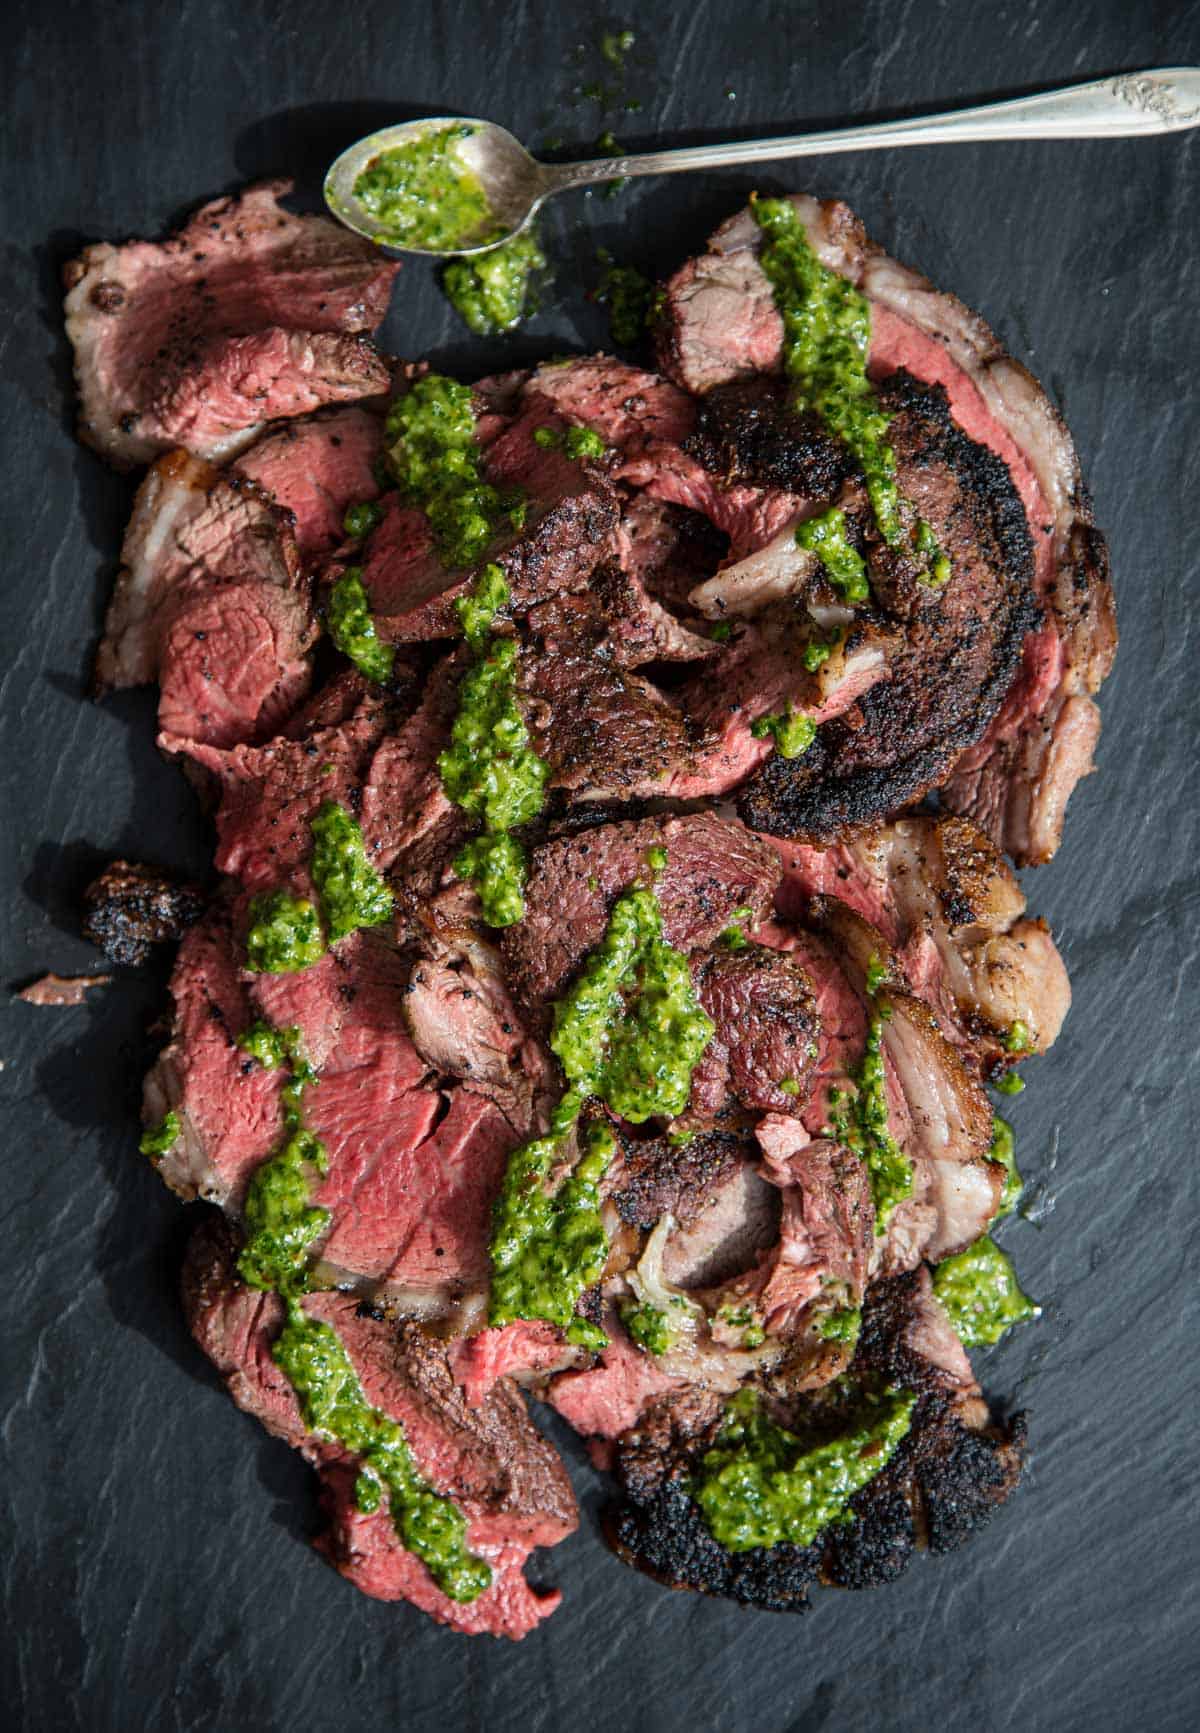 Slices of Grilled Picanha topped with chimichurri sauce
